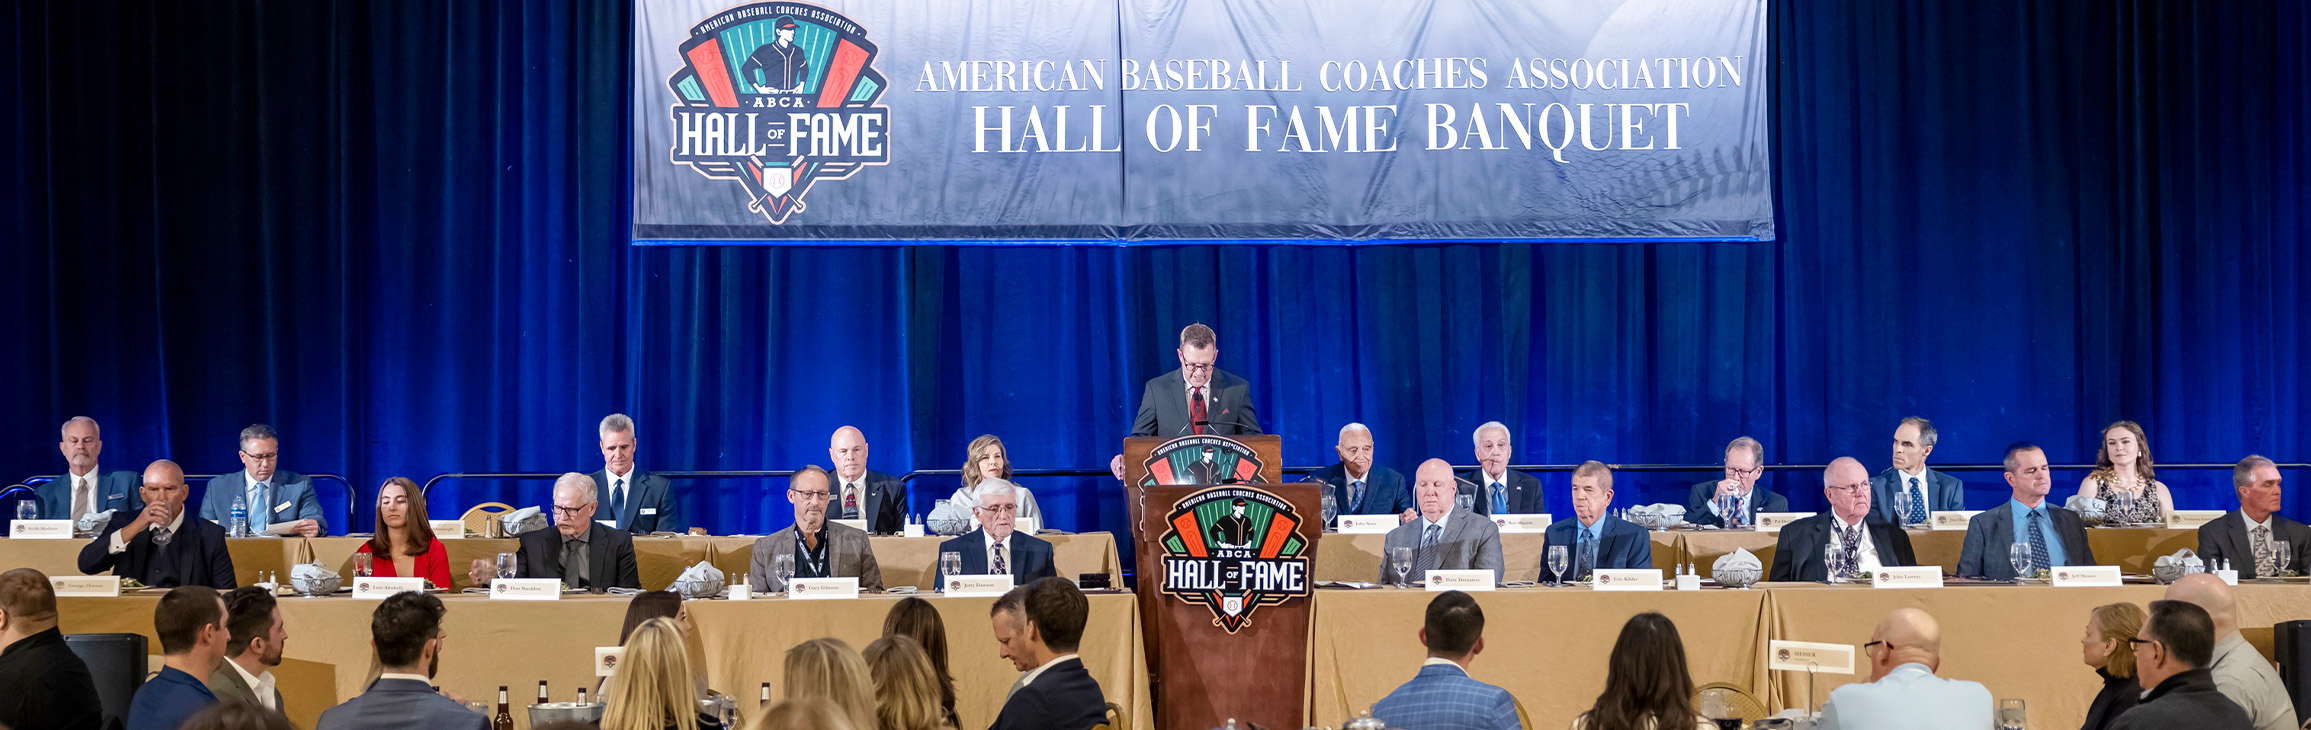 ABCA Hall of Fame Banquet